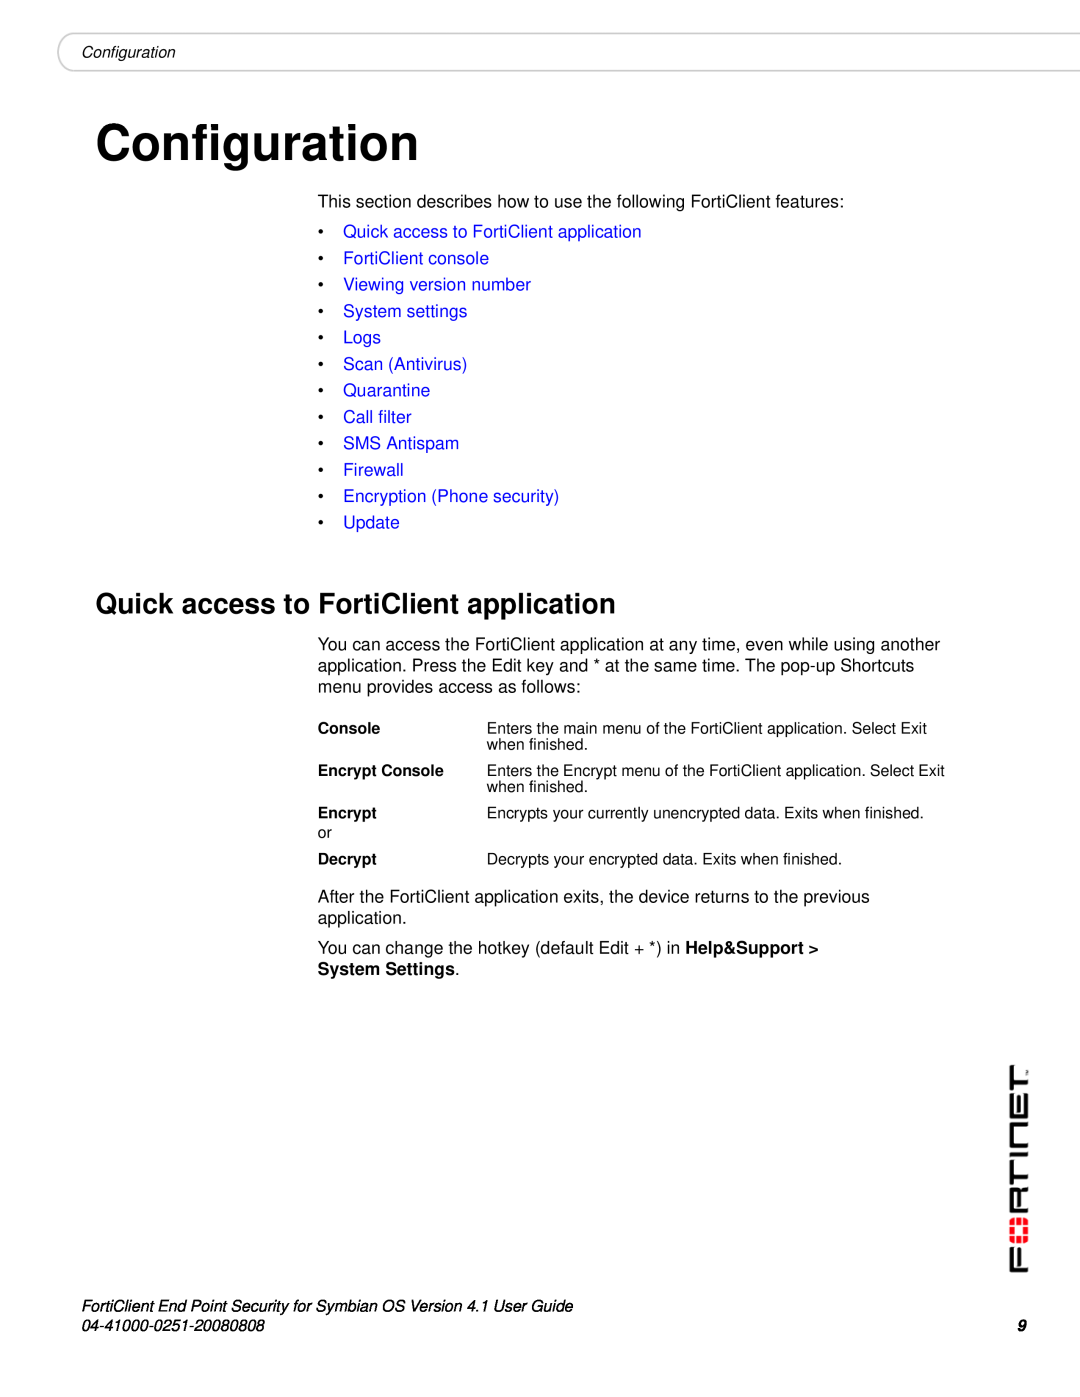 Fortinet Version 4.1 manual Configuration, Quick access to FortiClient application 